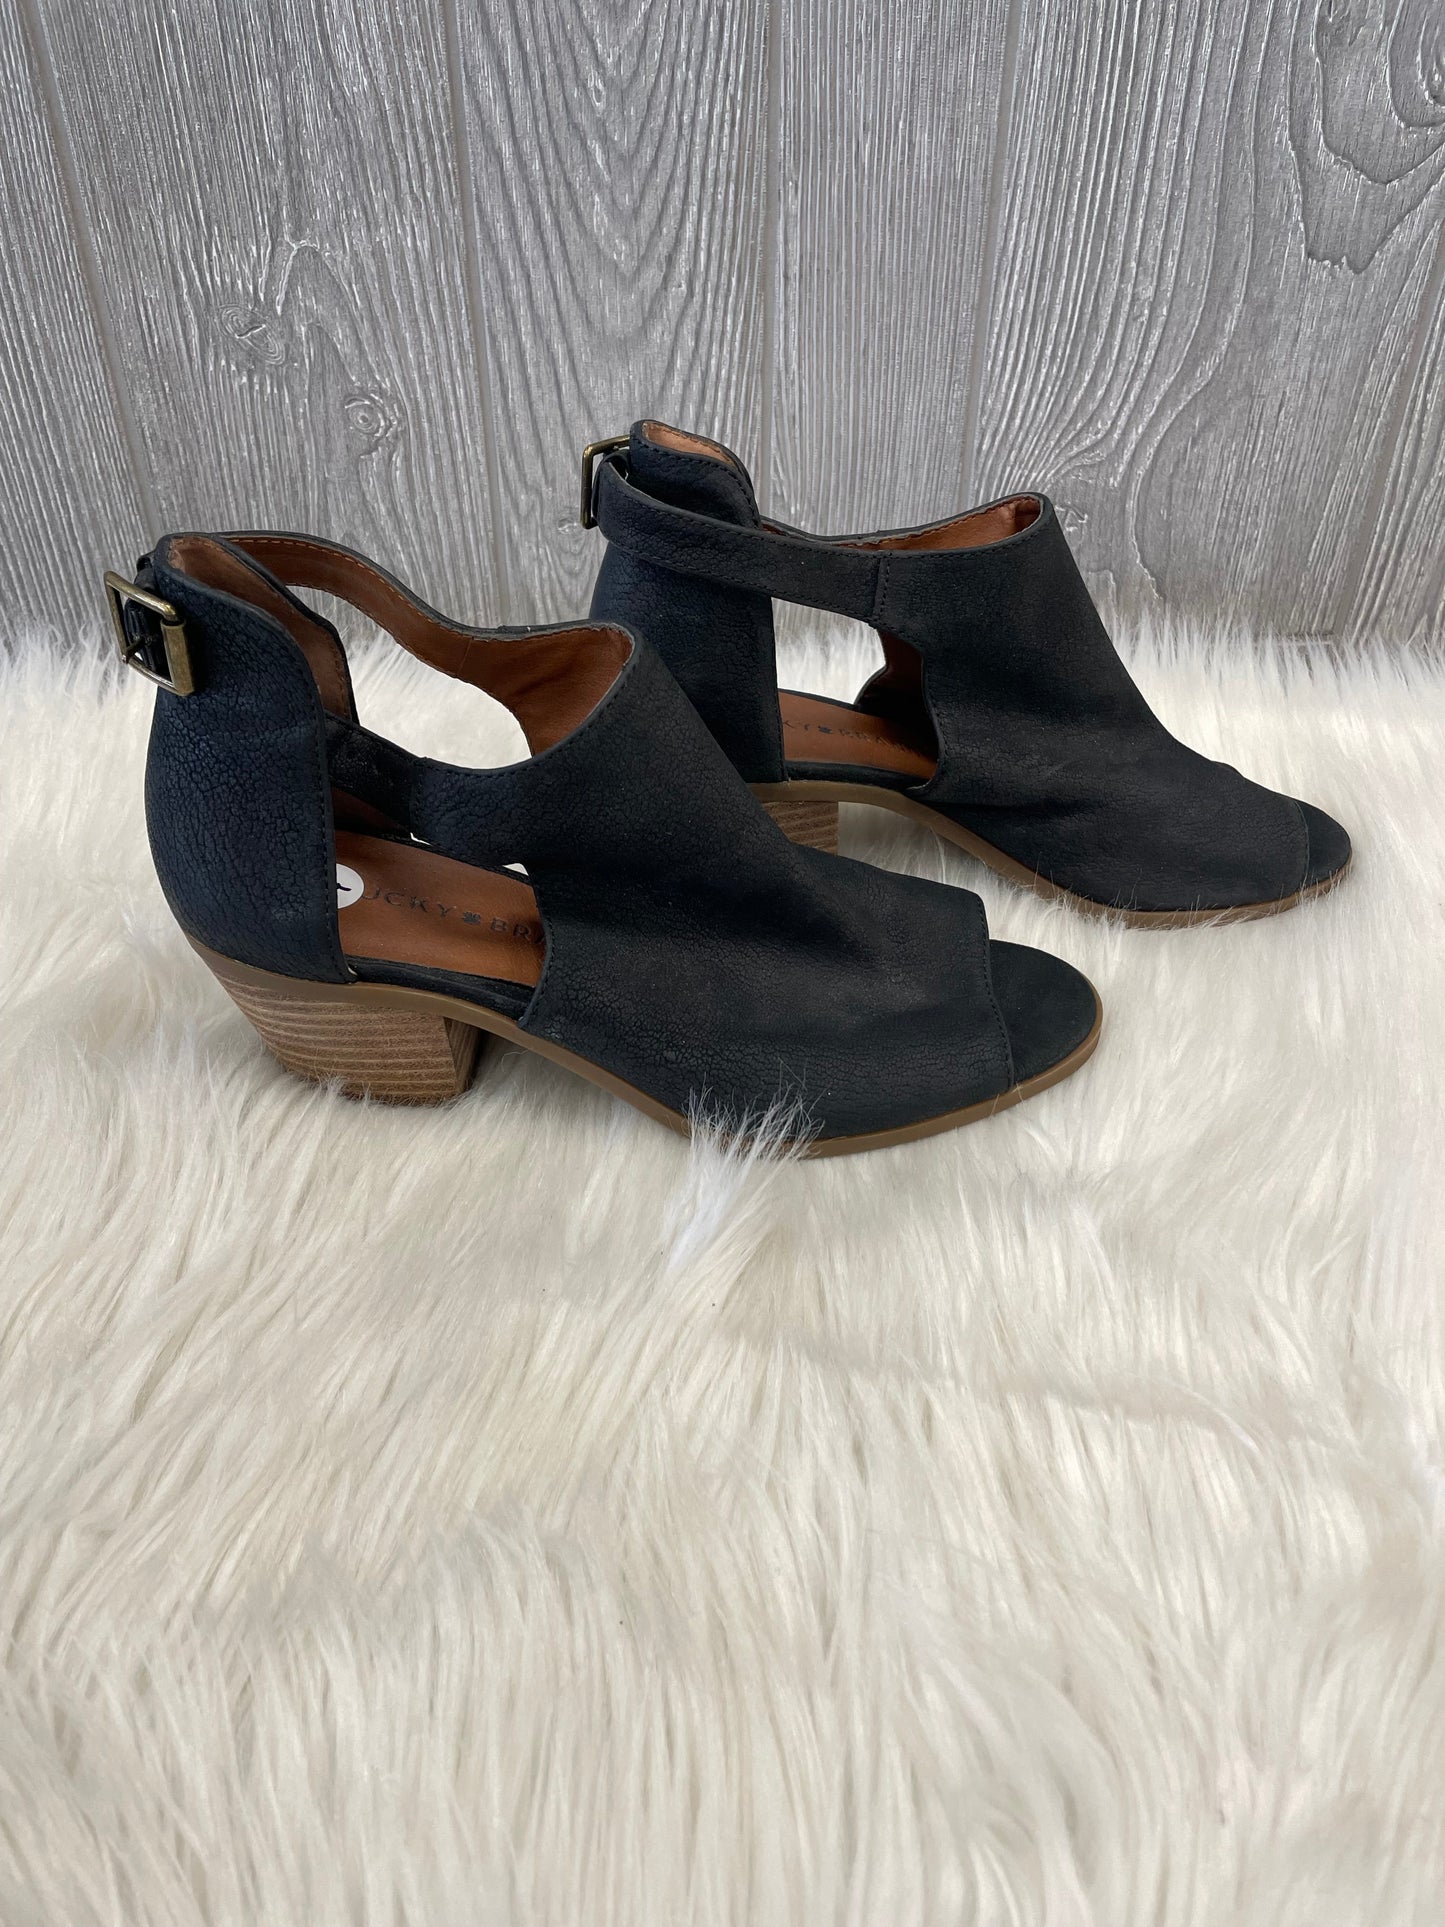 Black Shoes Heels Block Lucky Brand, Size 7